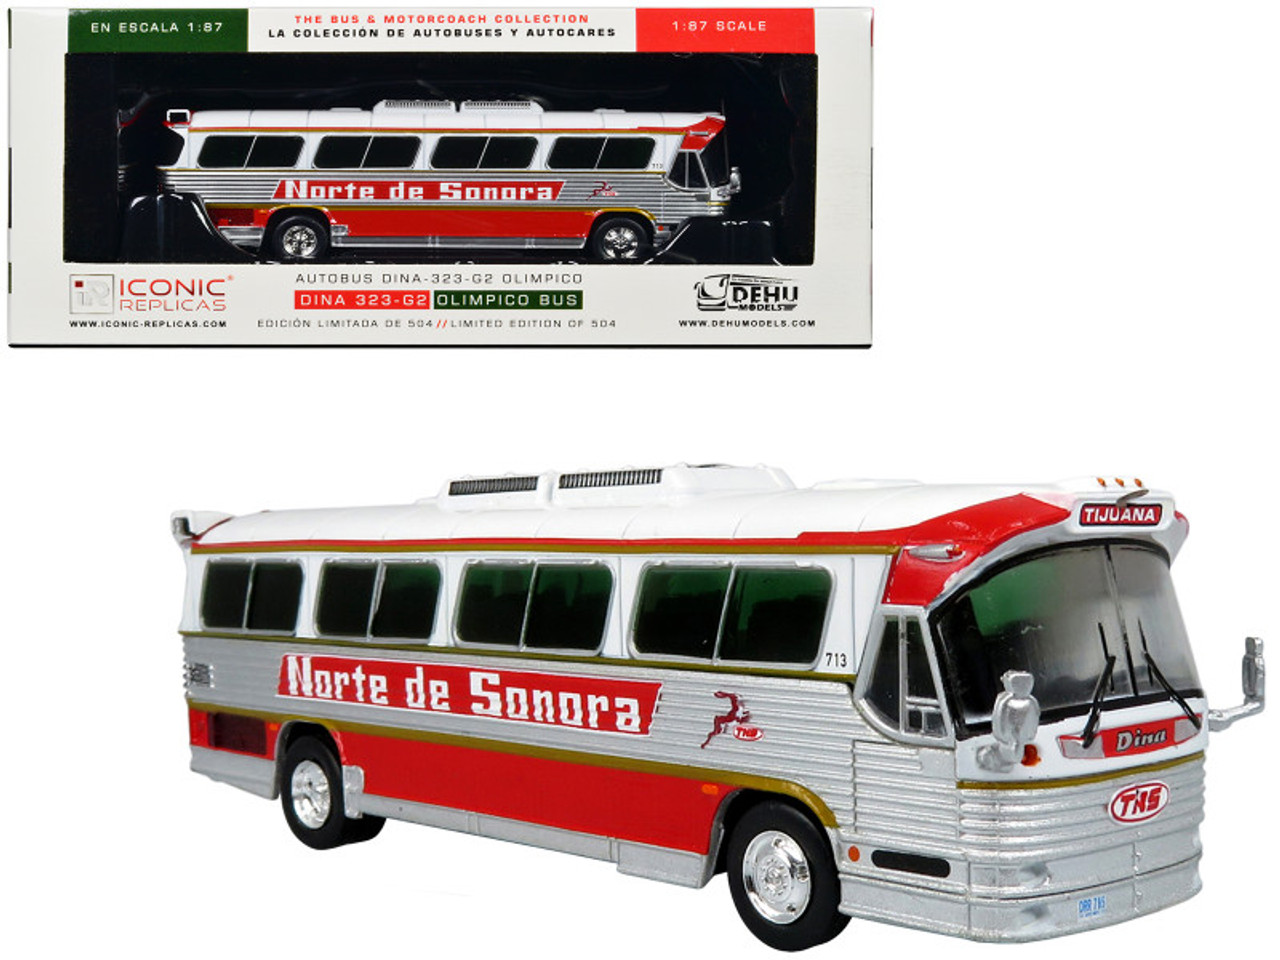 Dina 323-G2 Olimpico Coach Bus "Norte de Sonora" White and Silver with Red Stripes Limited Edition to 504 pieces Worldwide "The Bus and Motorcoach Collection" 1/87 (HO) Diecast Model by Iconic Replicas